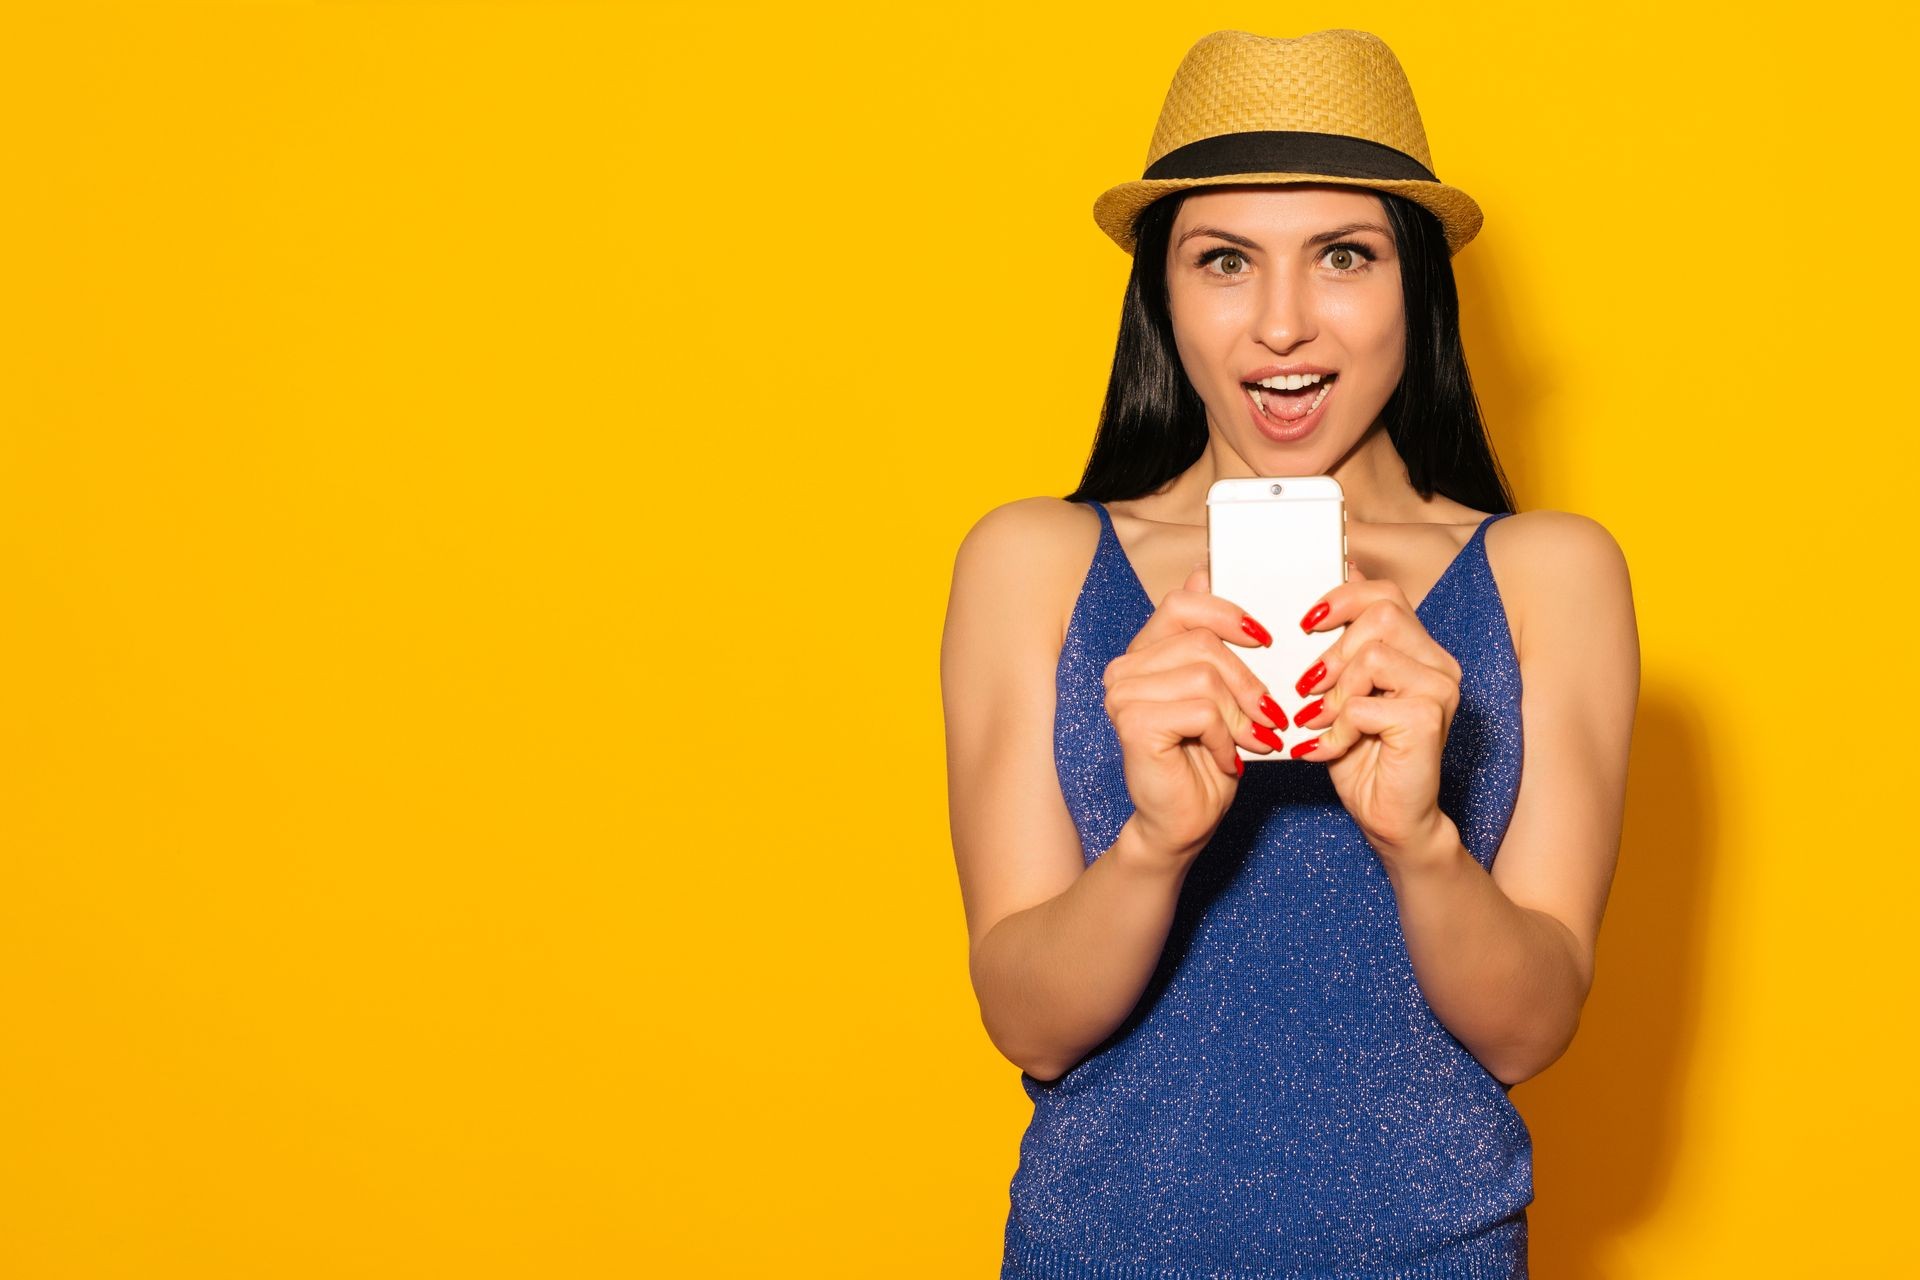 Excited laughing woman in hat standing and using mobile phone over yellow background - Image